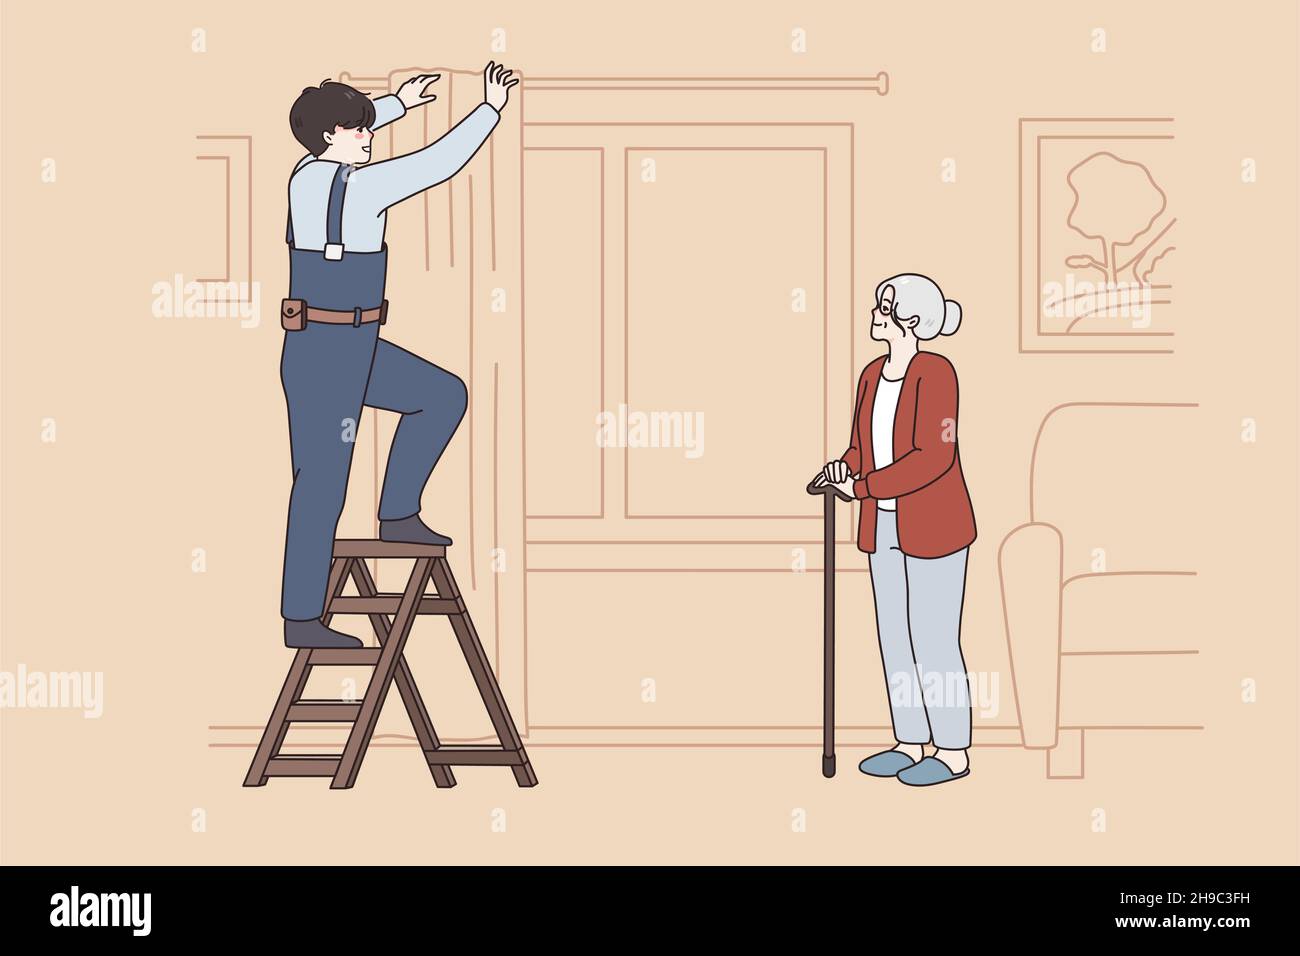 Repairing works and help concept. Young man worker repairman putting curtains to window helping elderly woman in her apartment vector illustration  Stock Vector